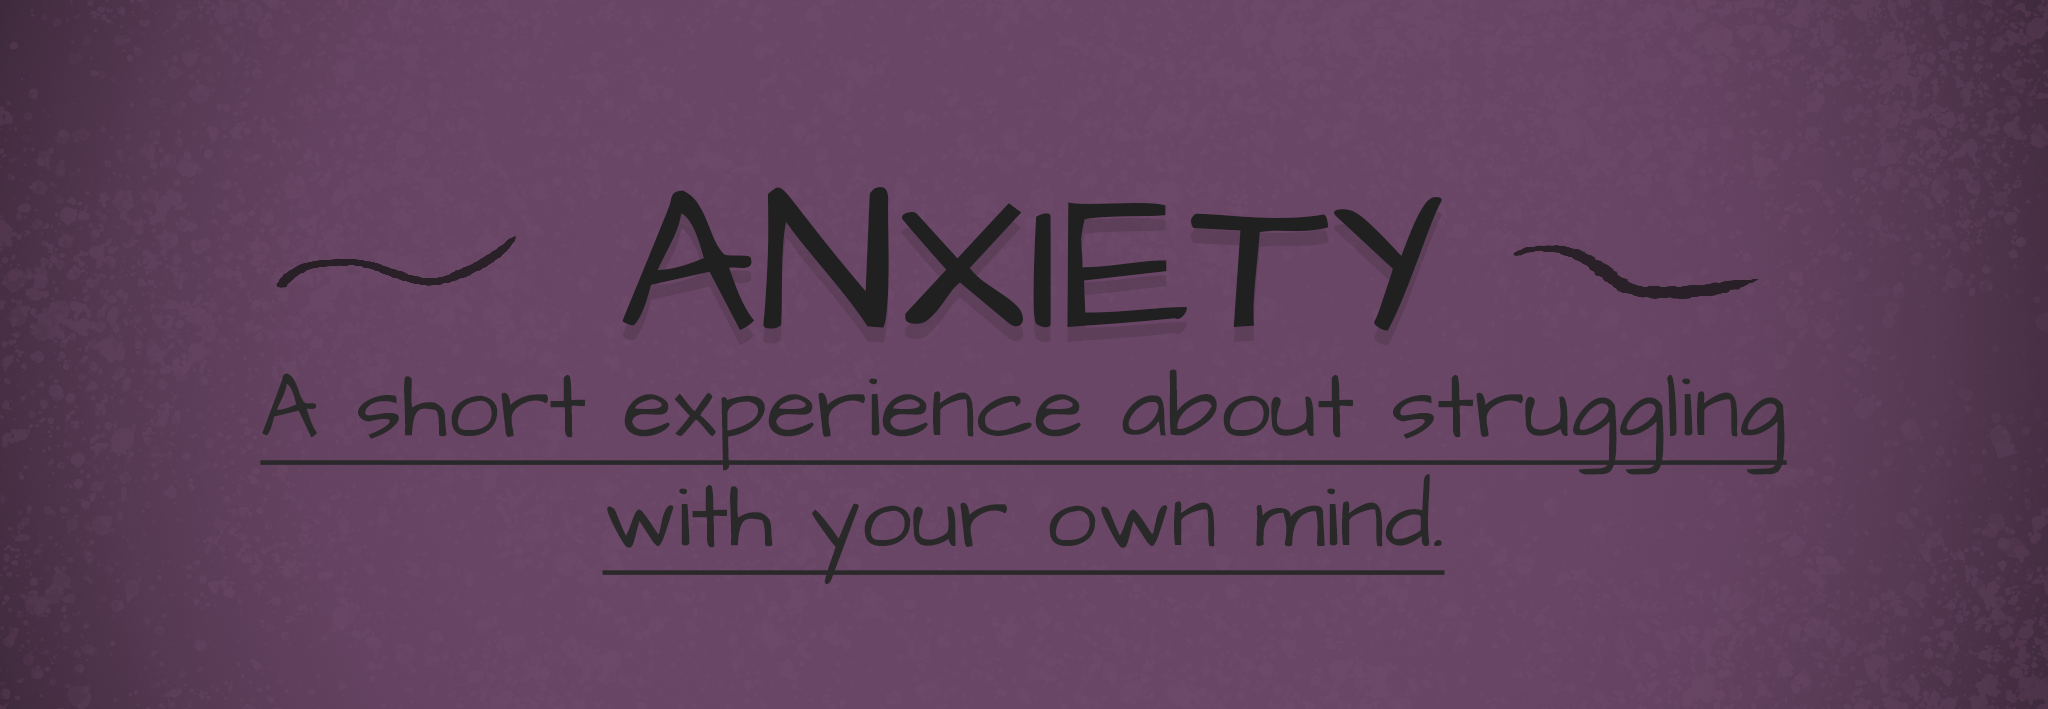 Anxiety-a short experience